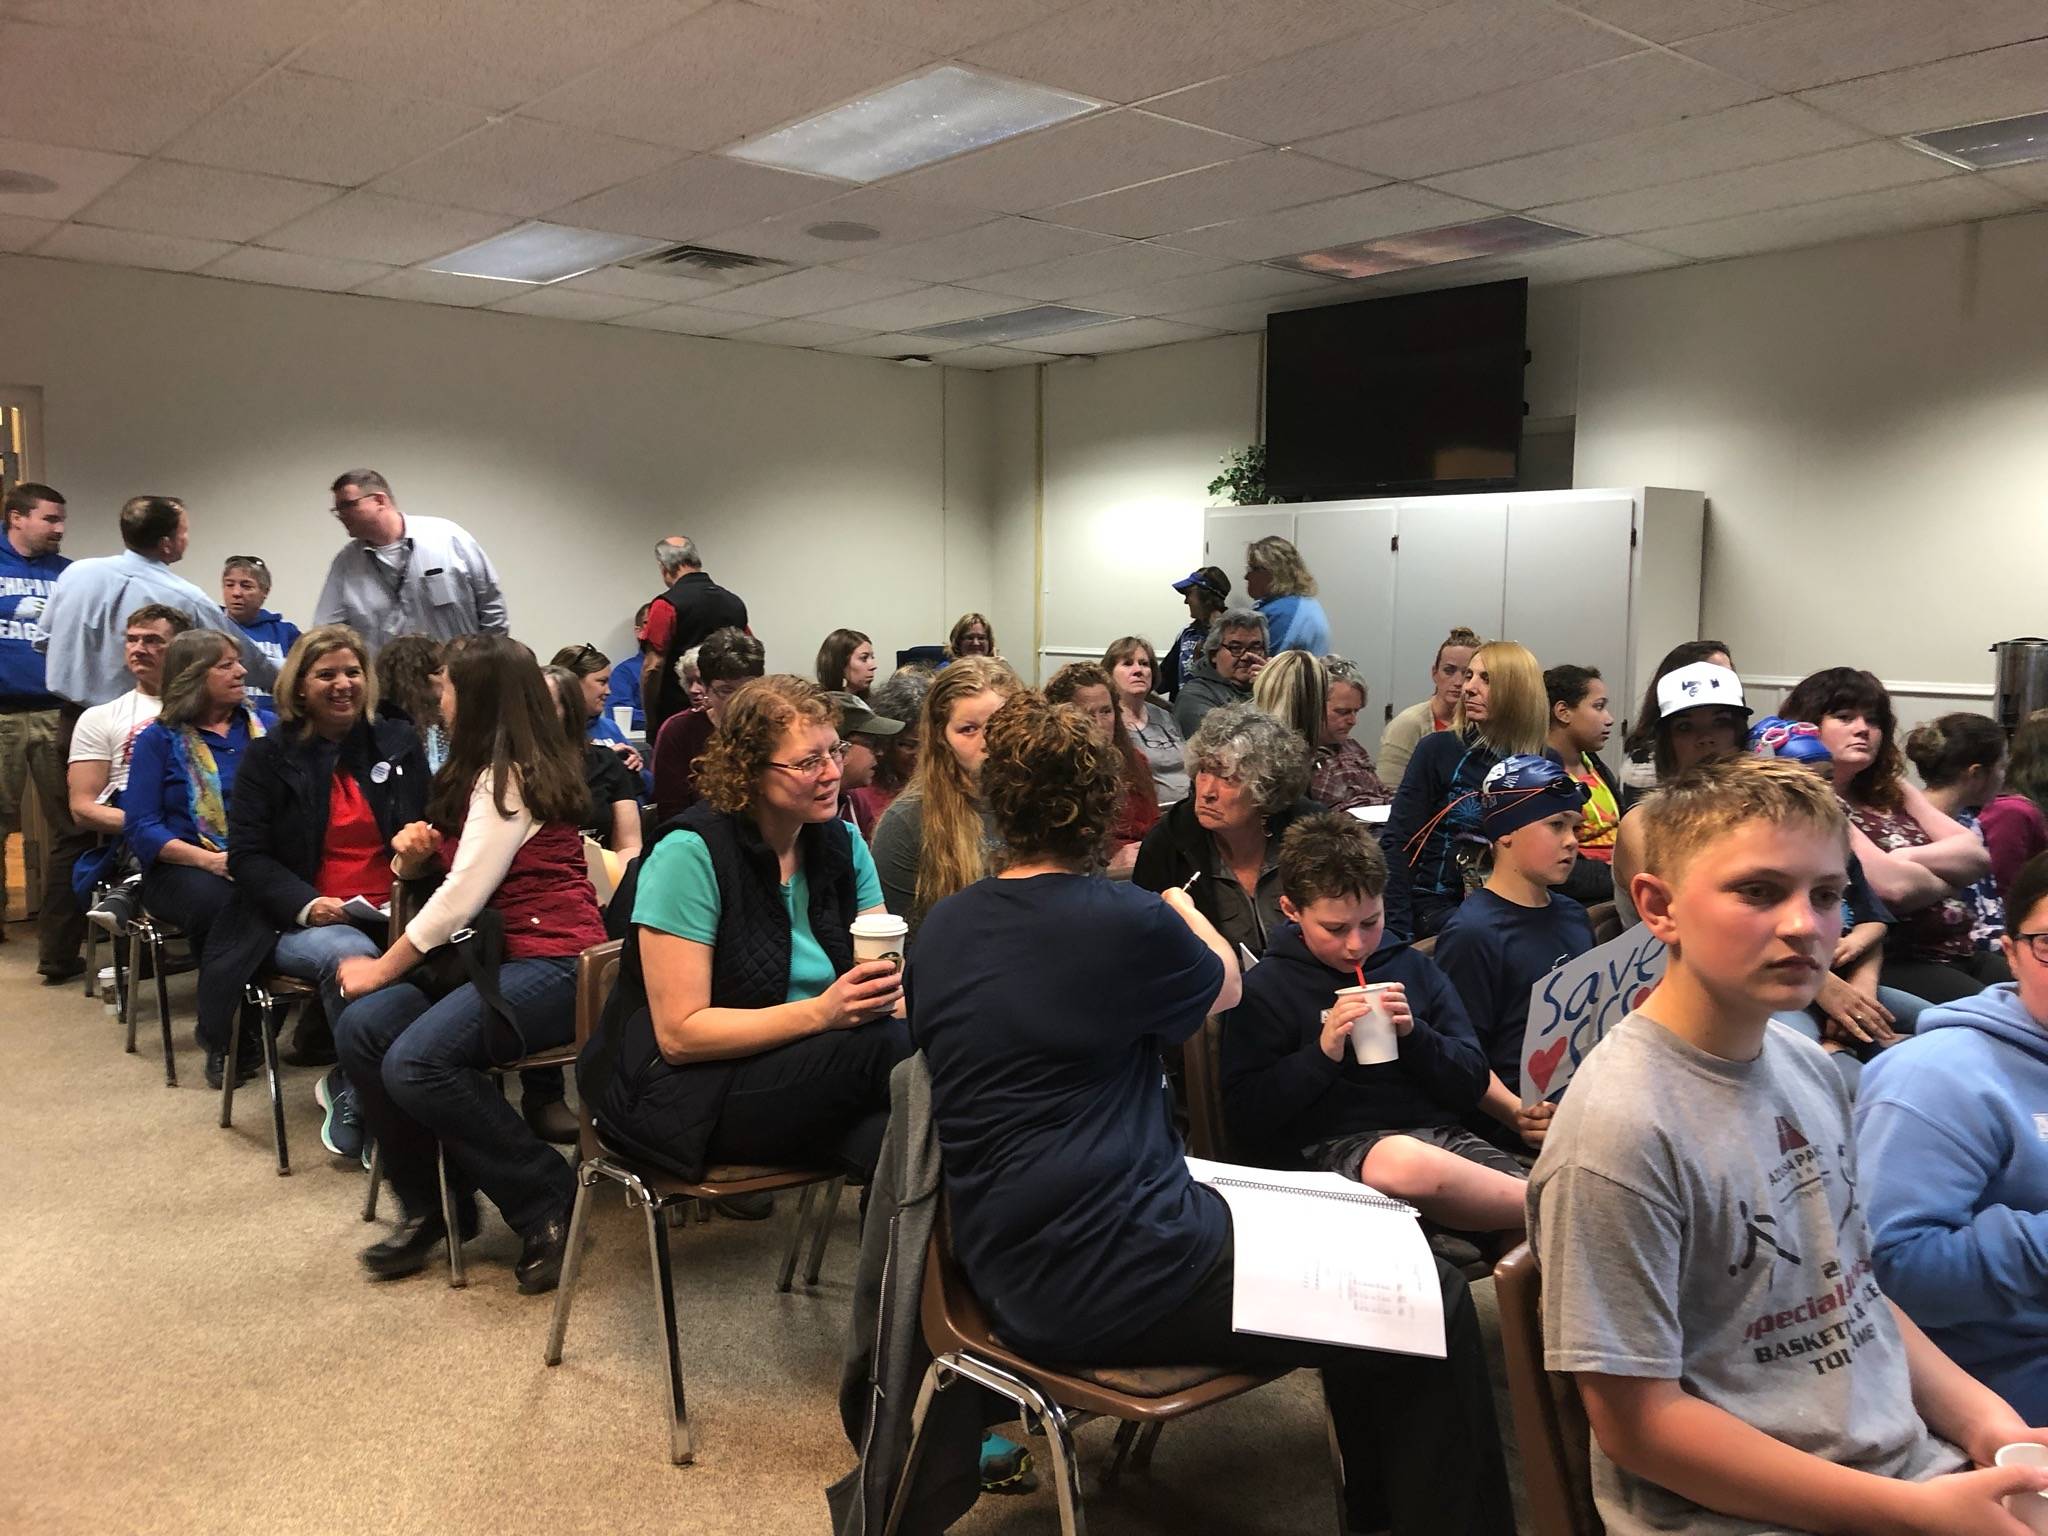 Members of the community attend the Kenai Peninsula Borough School Board meeting on Monday in Soldotna. The board passed a $145 million budget during the meeting. (Photo by Victoria Petersen/Peninsula Clarion)